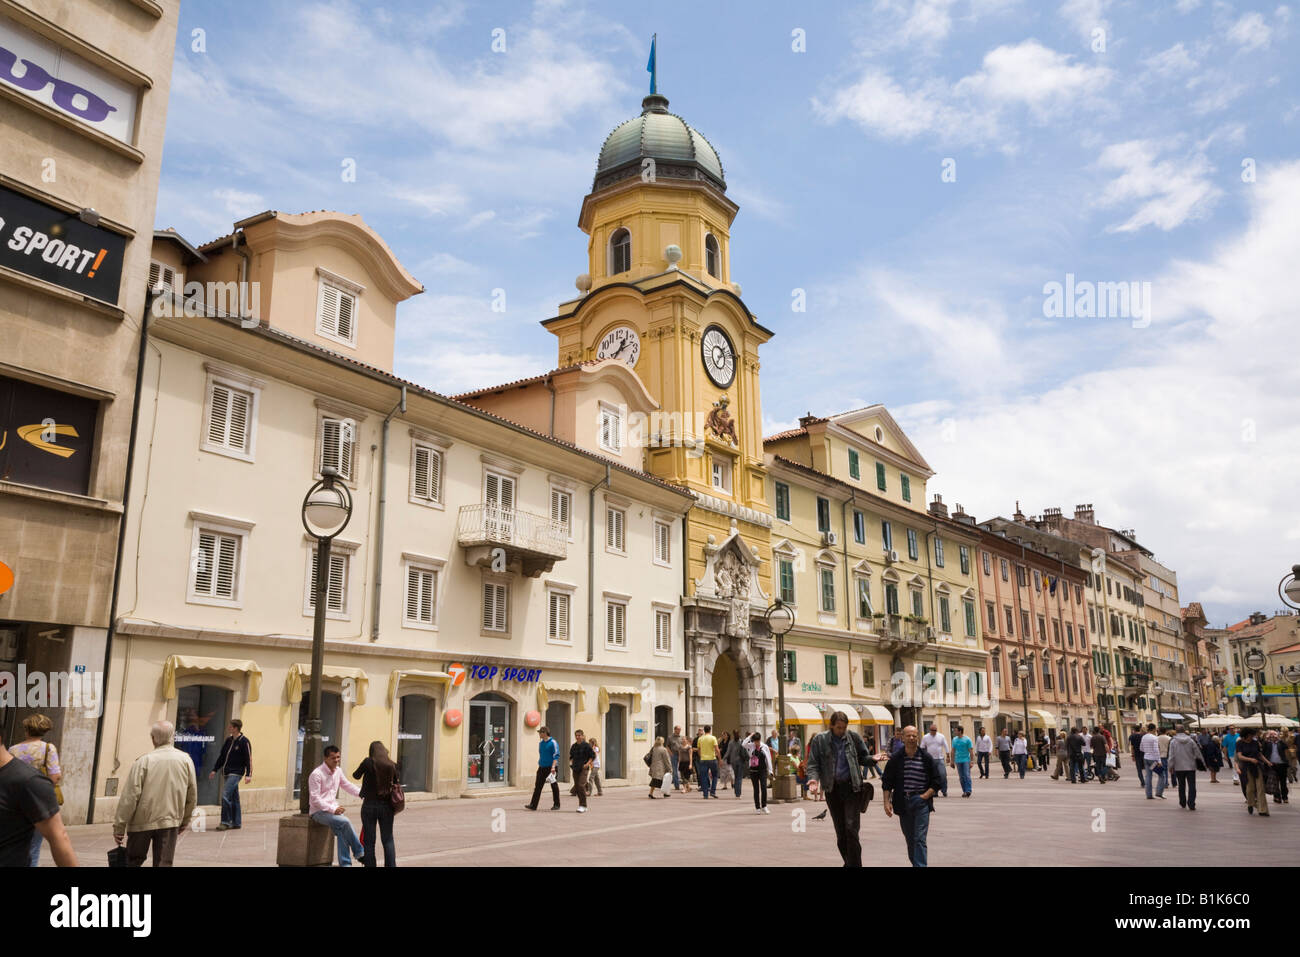 Croatia Shopping High Resolution Stock Photography and Images - Alamy